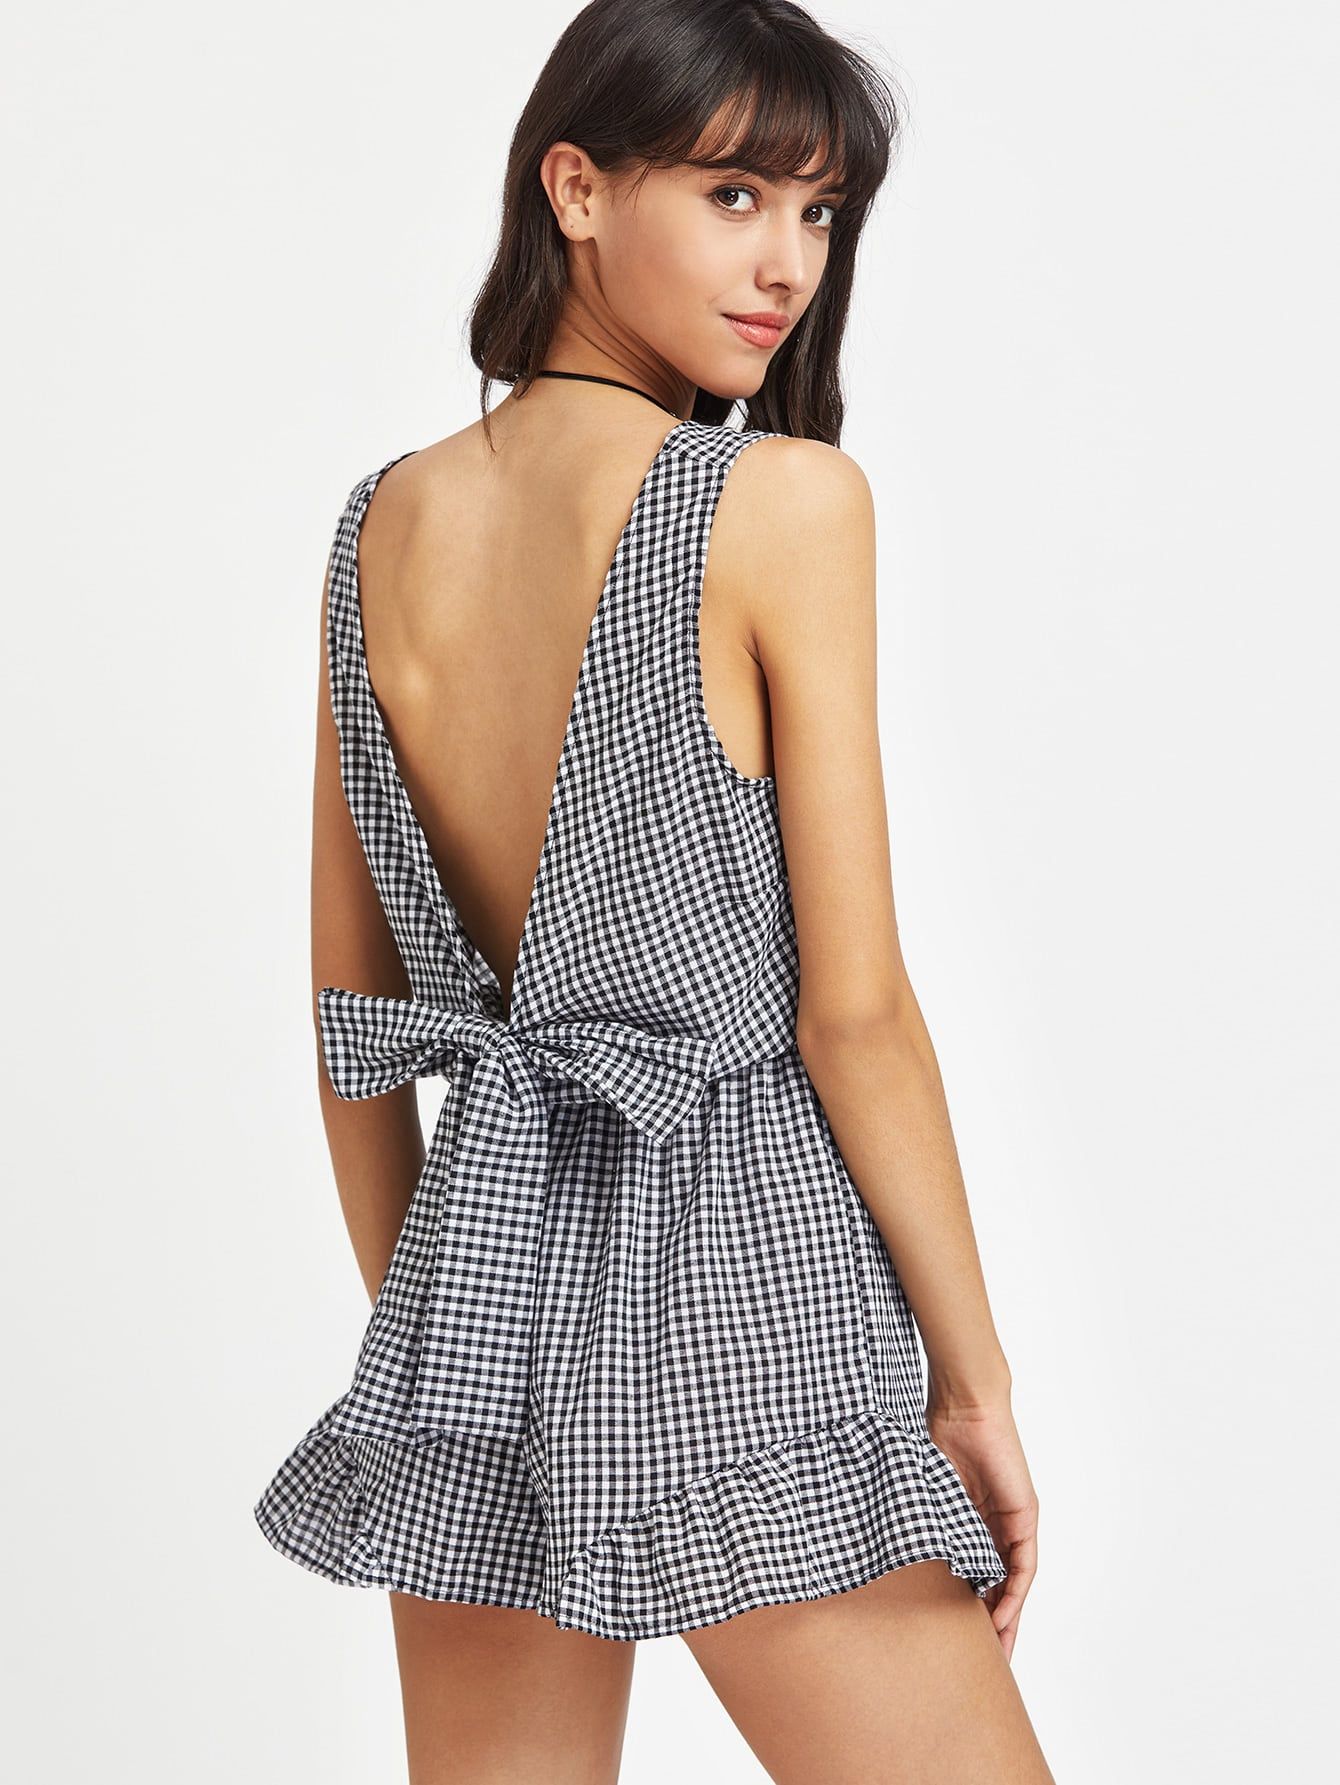 Plunged Gingham Bow Tie Back Romper | SHEIN